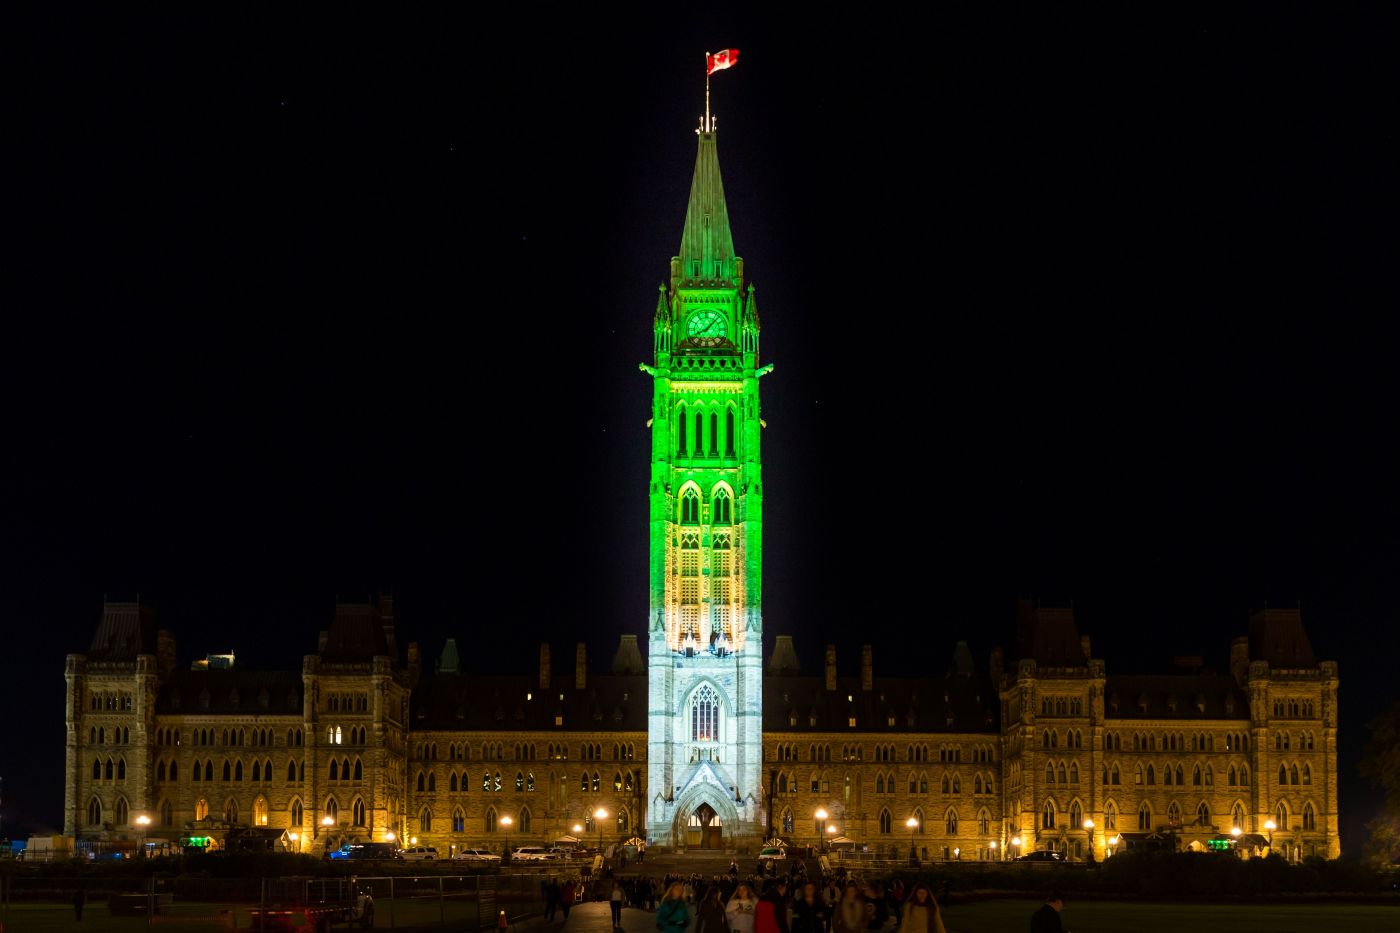 " Colour photograph of a large, six-storey building at night. A Canadian flag flies at the top of the tower in the centre. The tower is illuminated in blue and green."